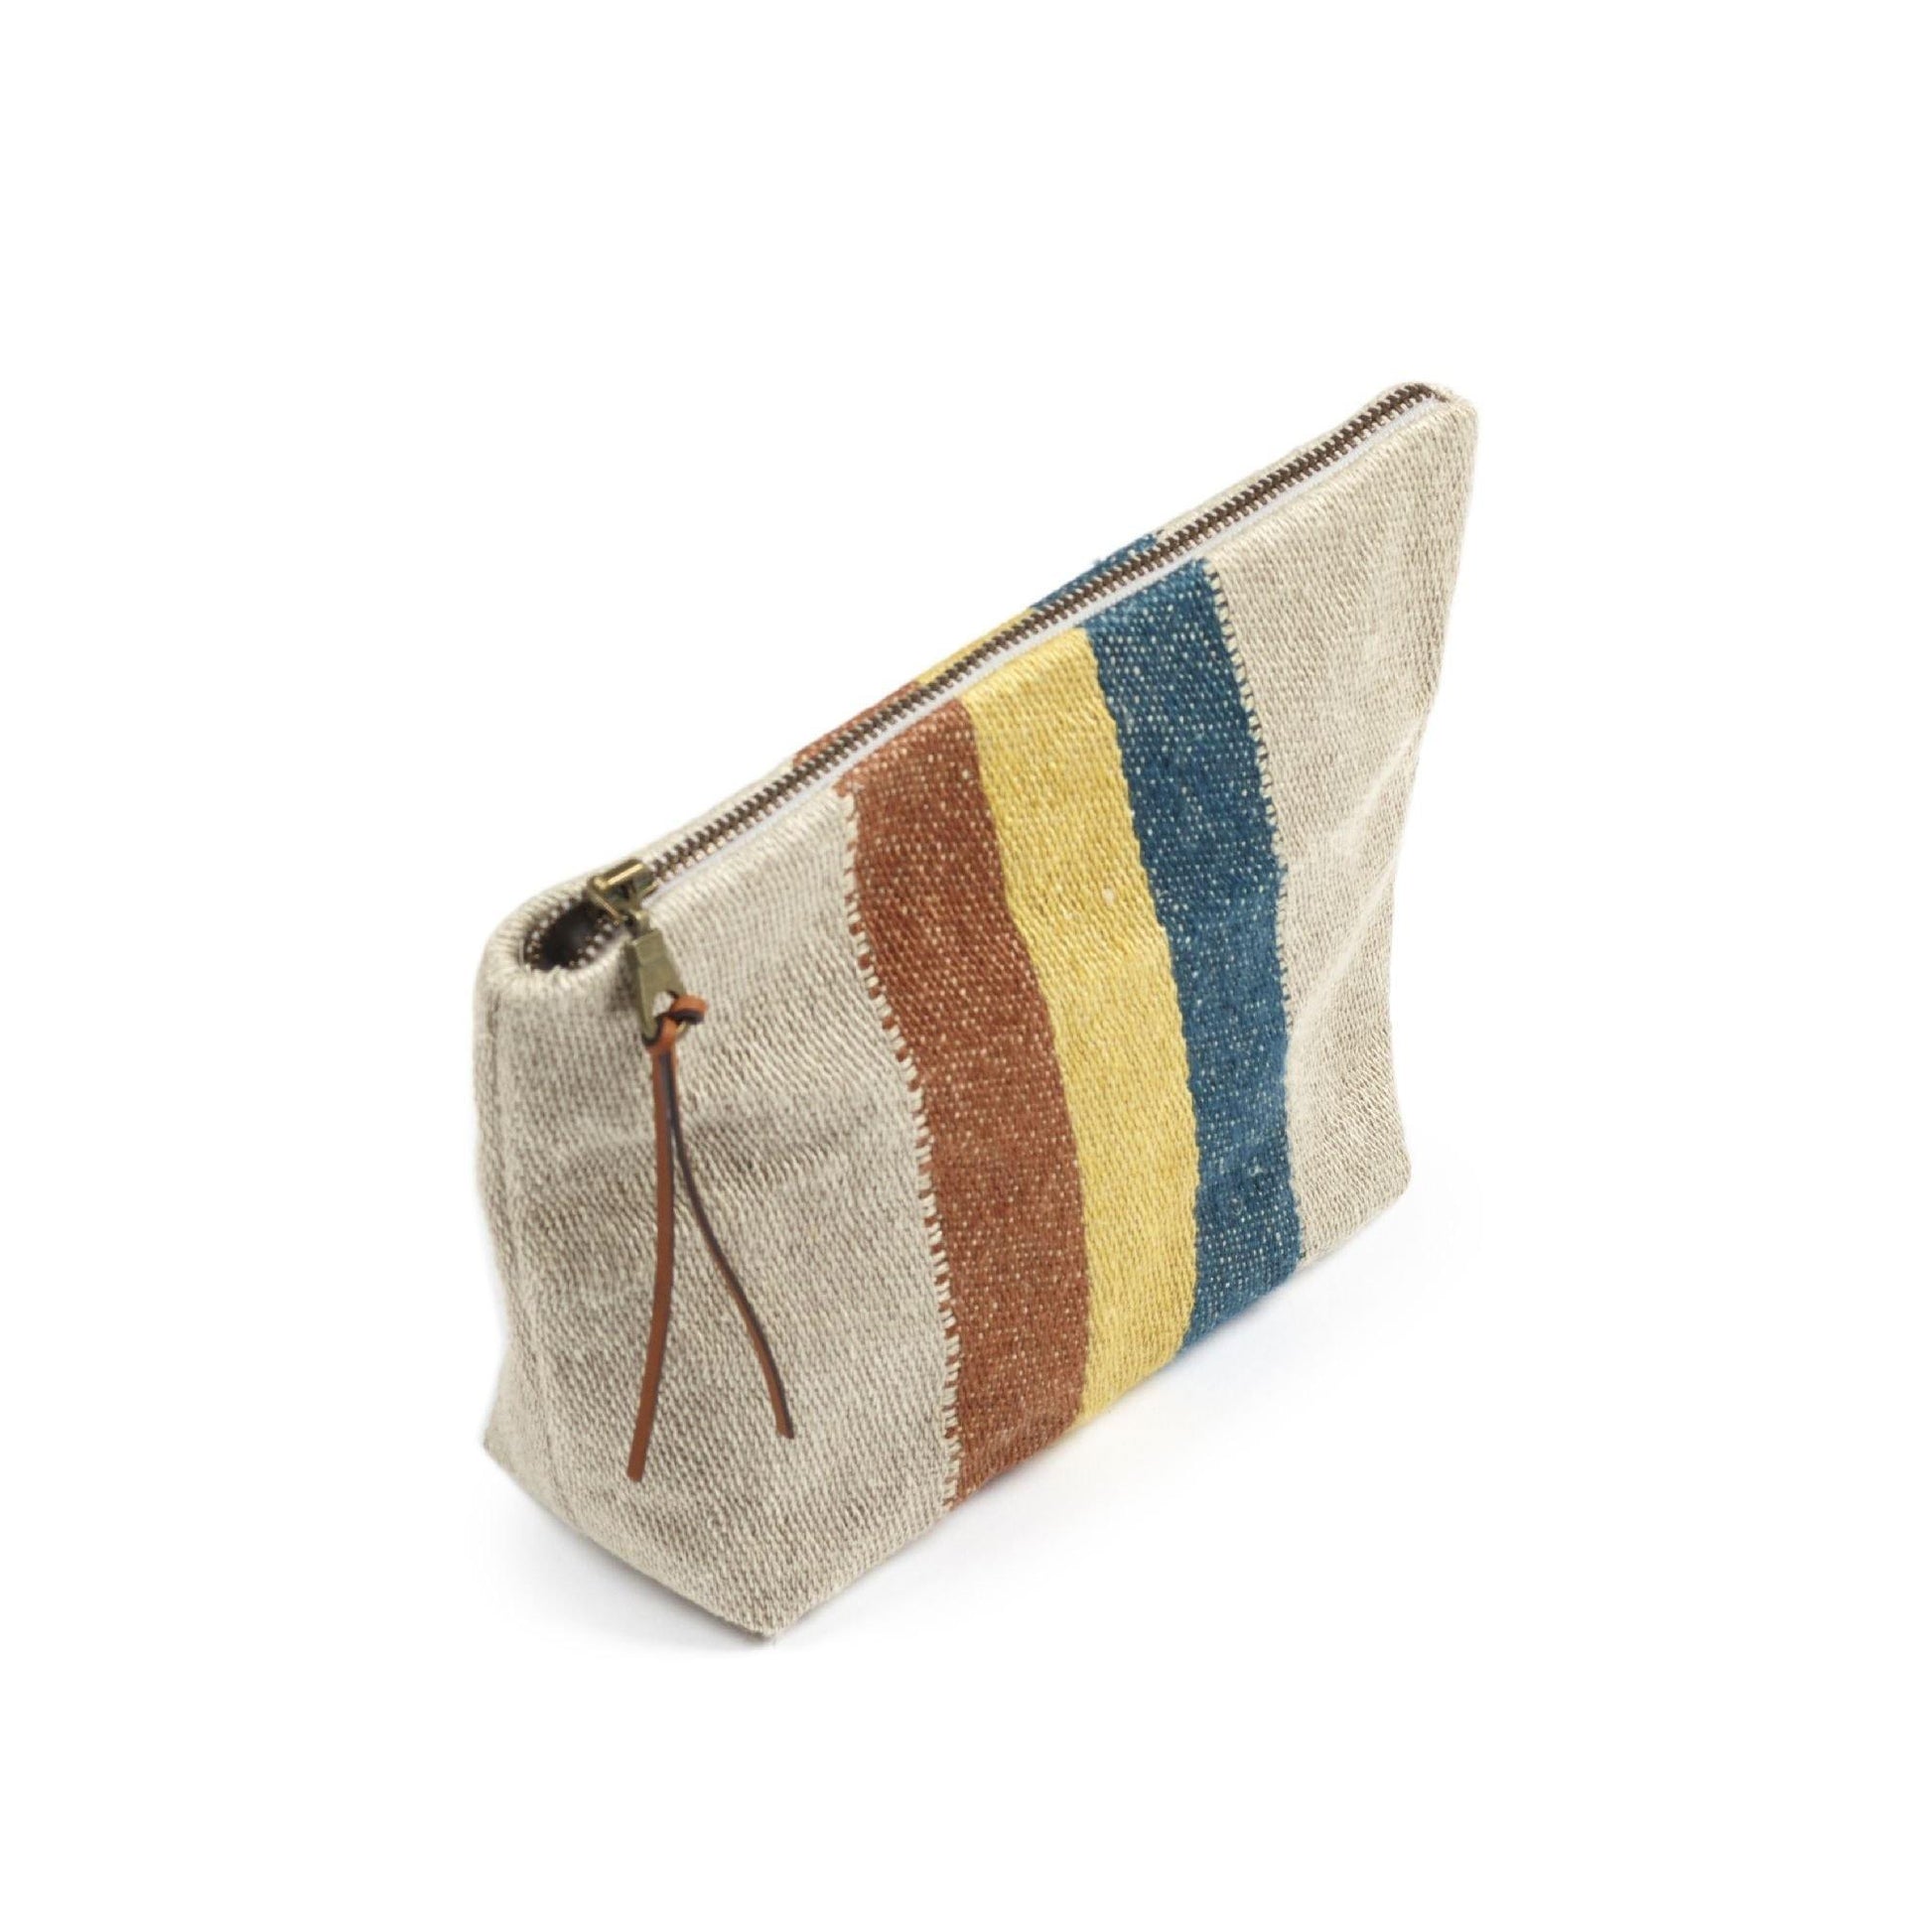 Belgian linen pouch product shot in color Mercurio by Libeco for South Hous.